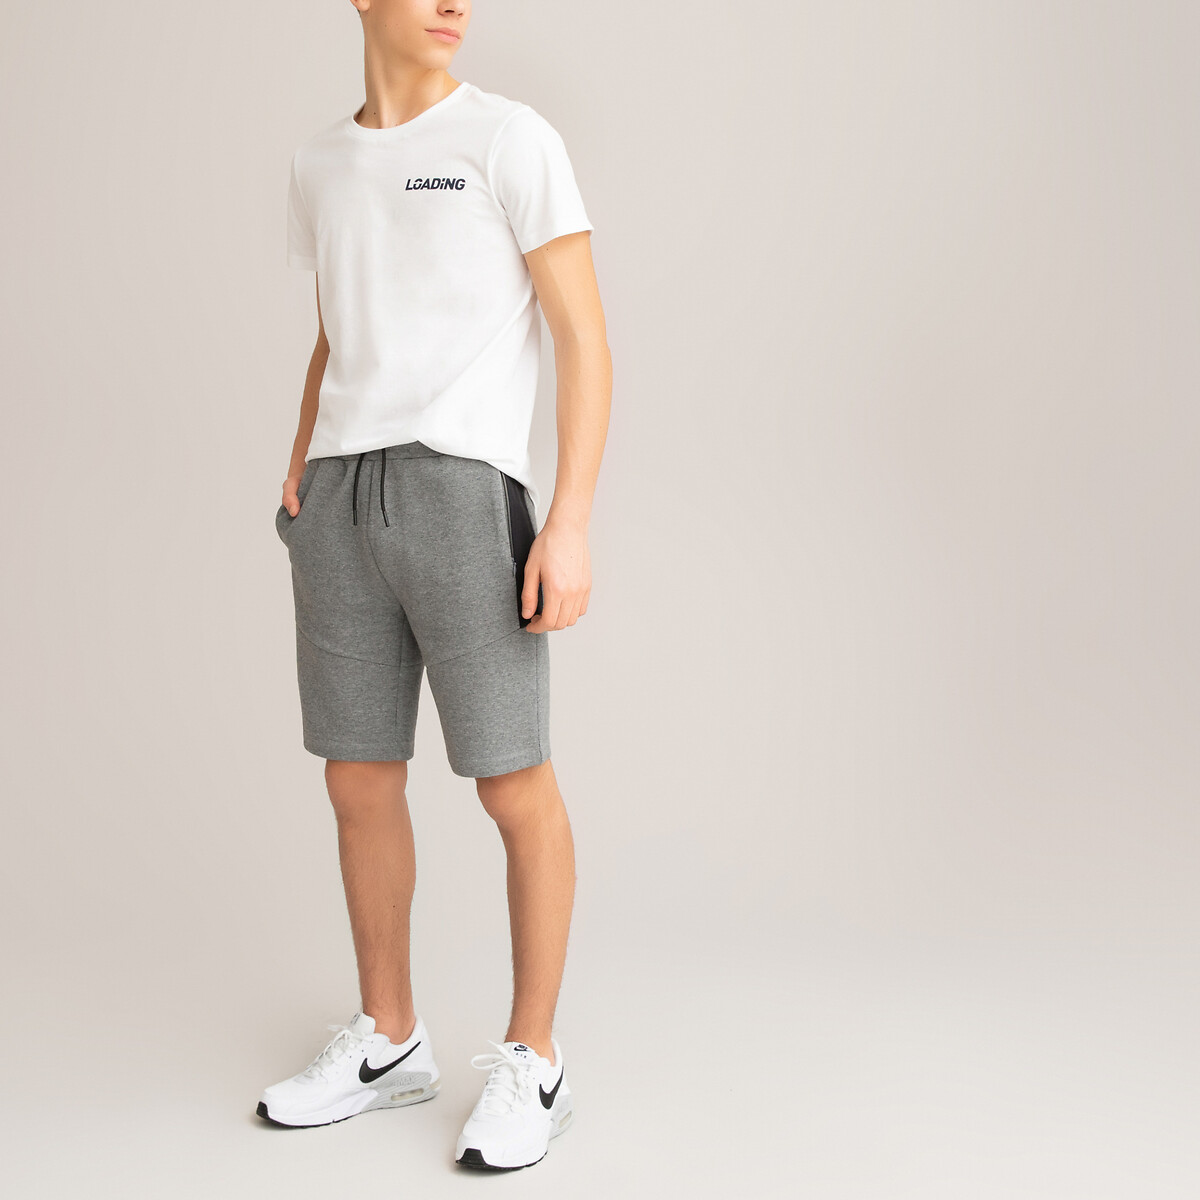 Sports Bermuda Shorts in Cotton Mix, 10-18 Years